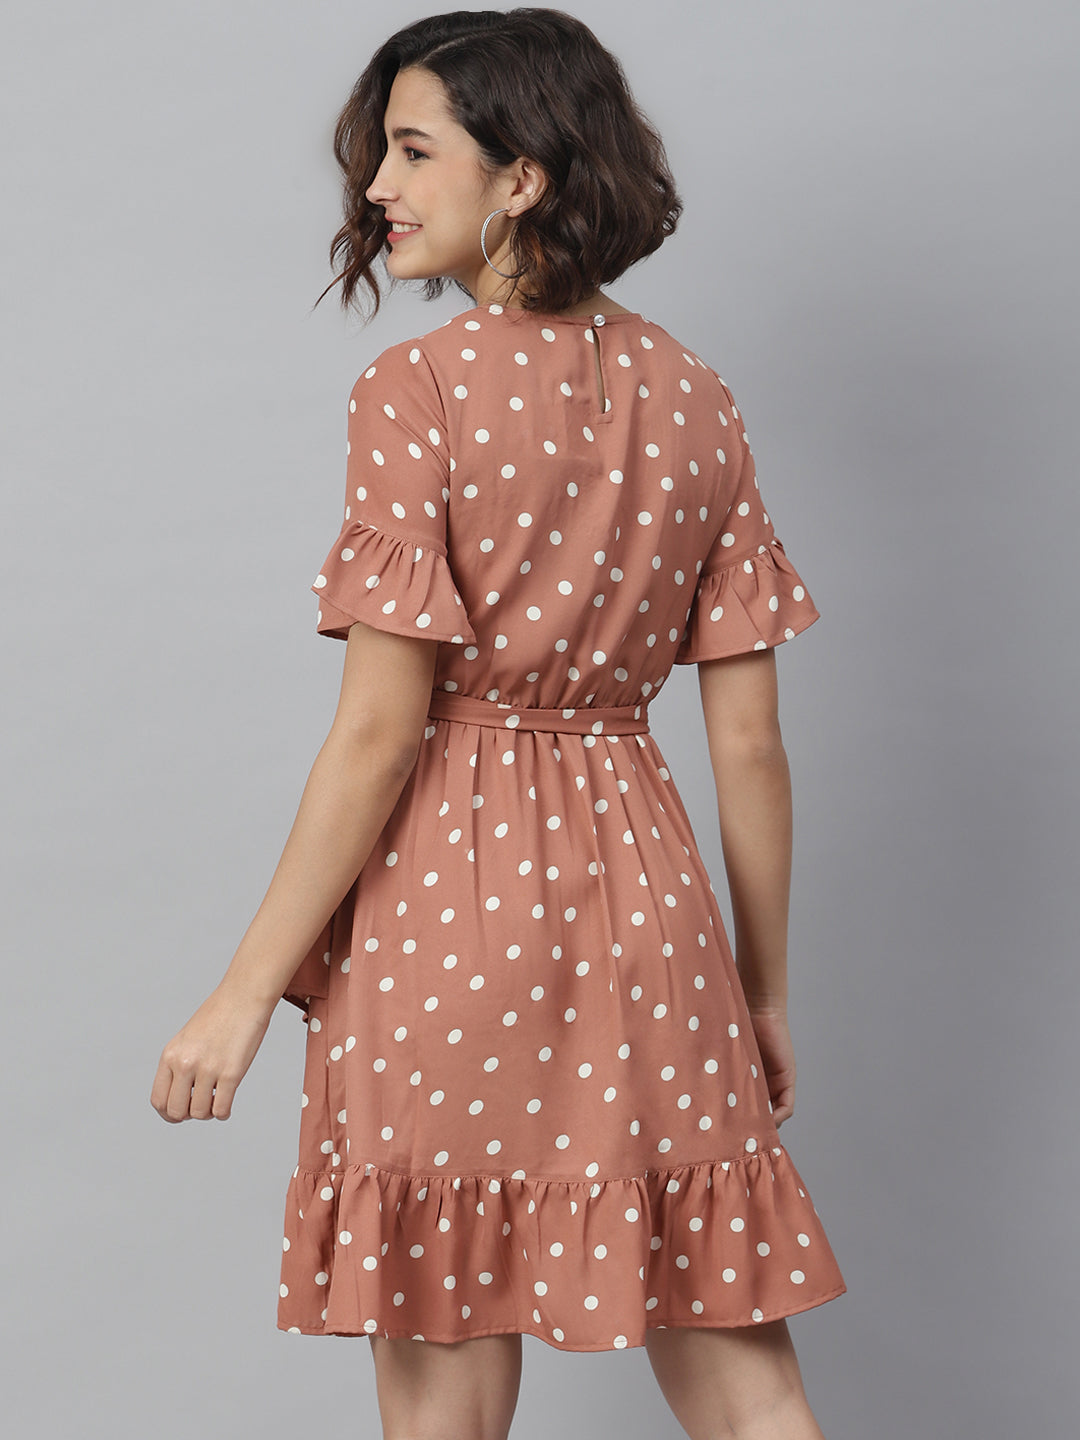 Women's Brown Polka Dress with Lace detail - StyleStone